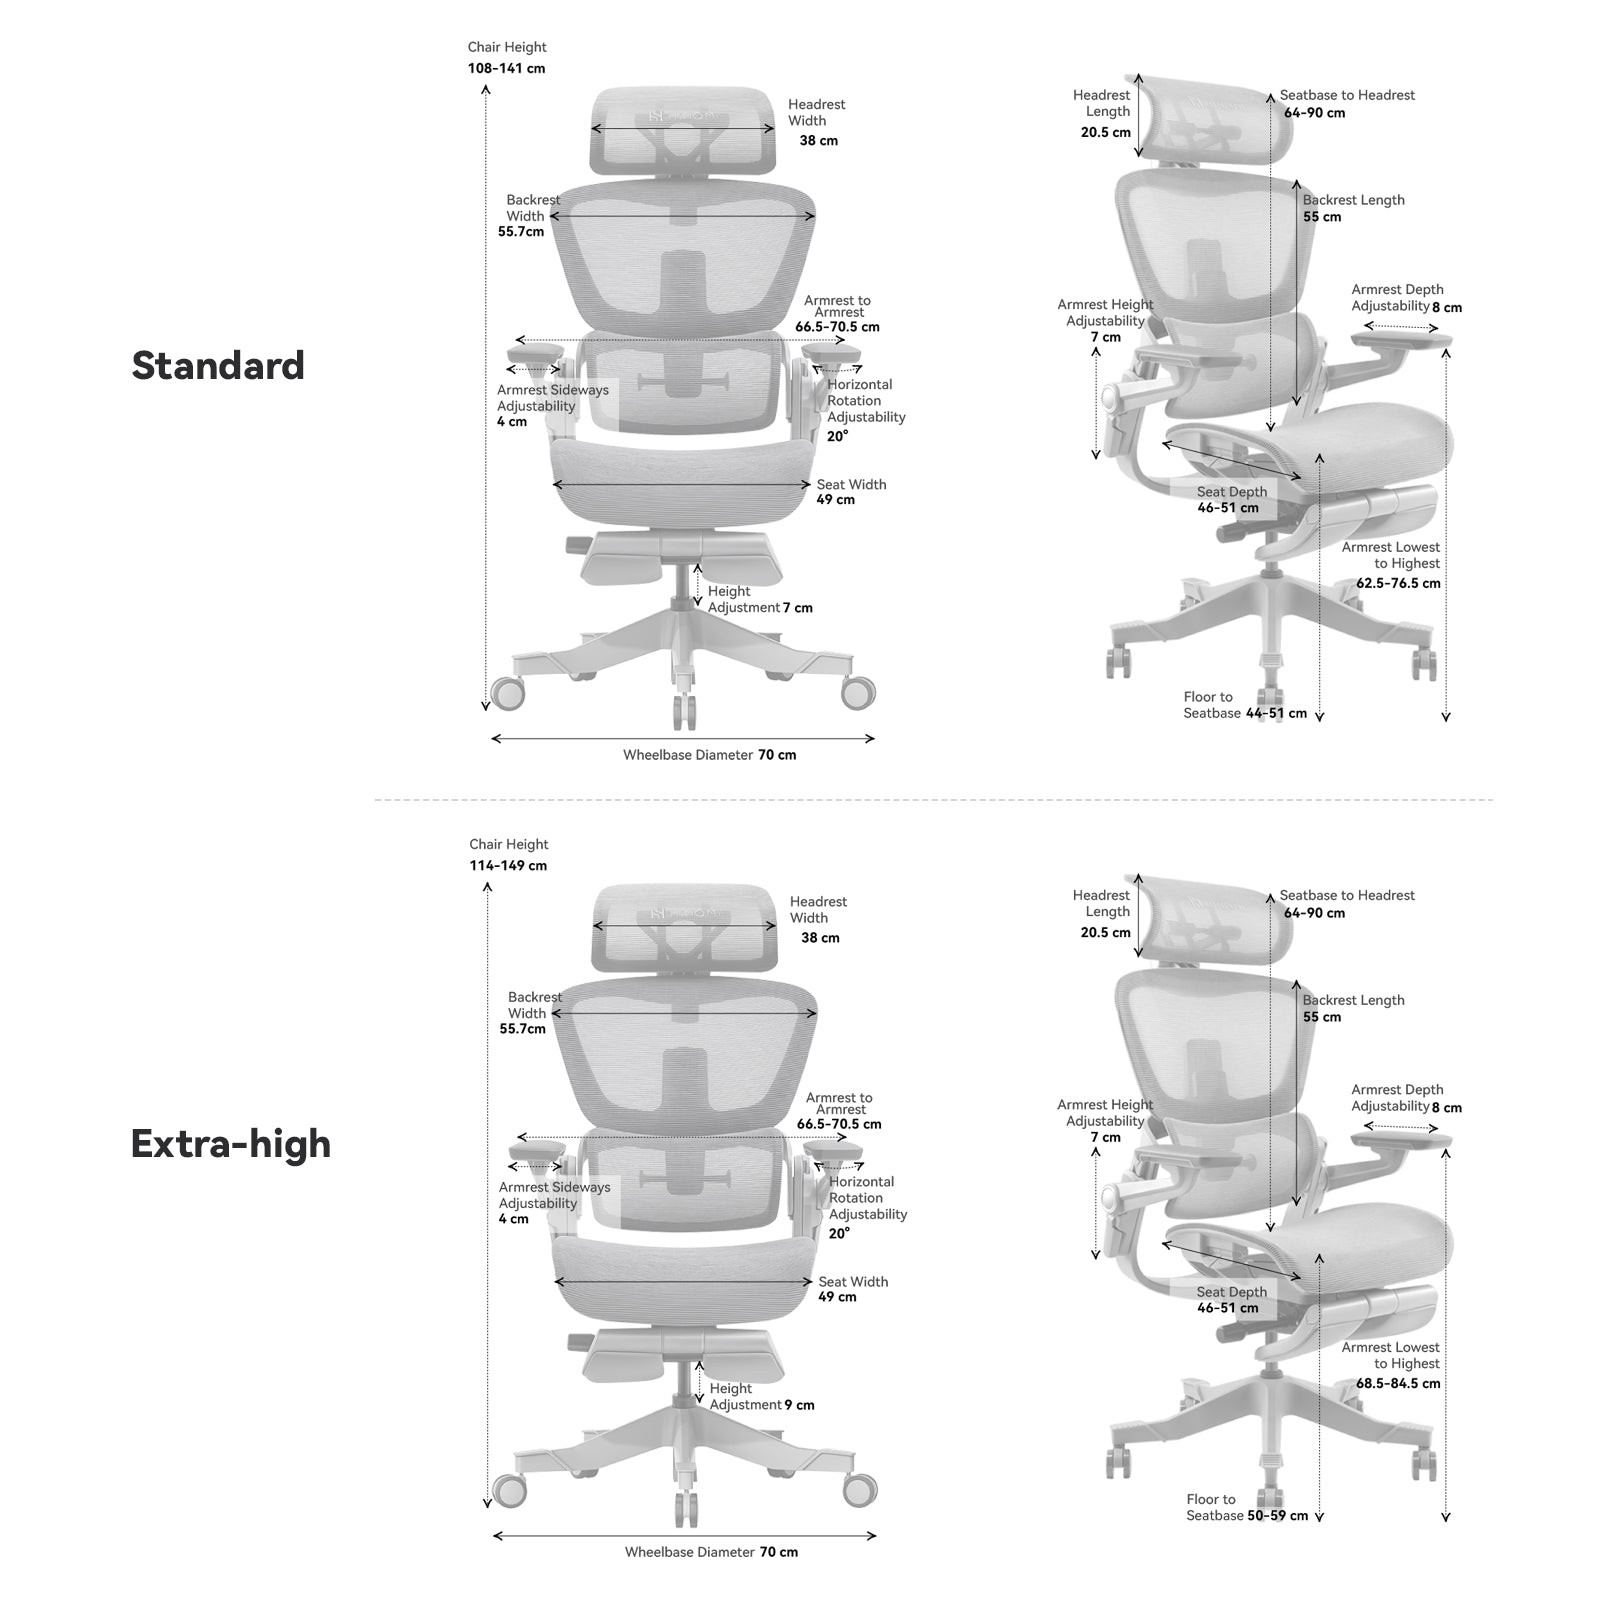 Ultimate comfort and flexibility with the Hinomi H1 Pro office chair -  GEARADICAL